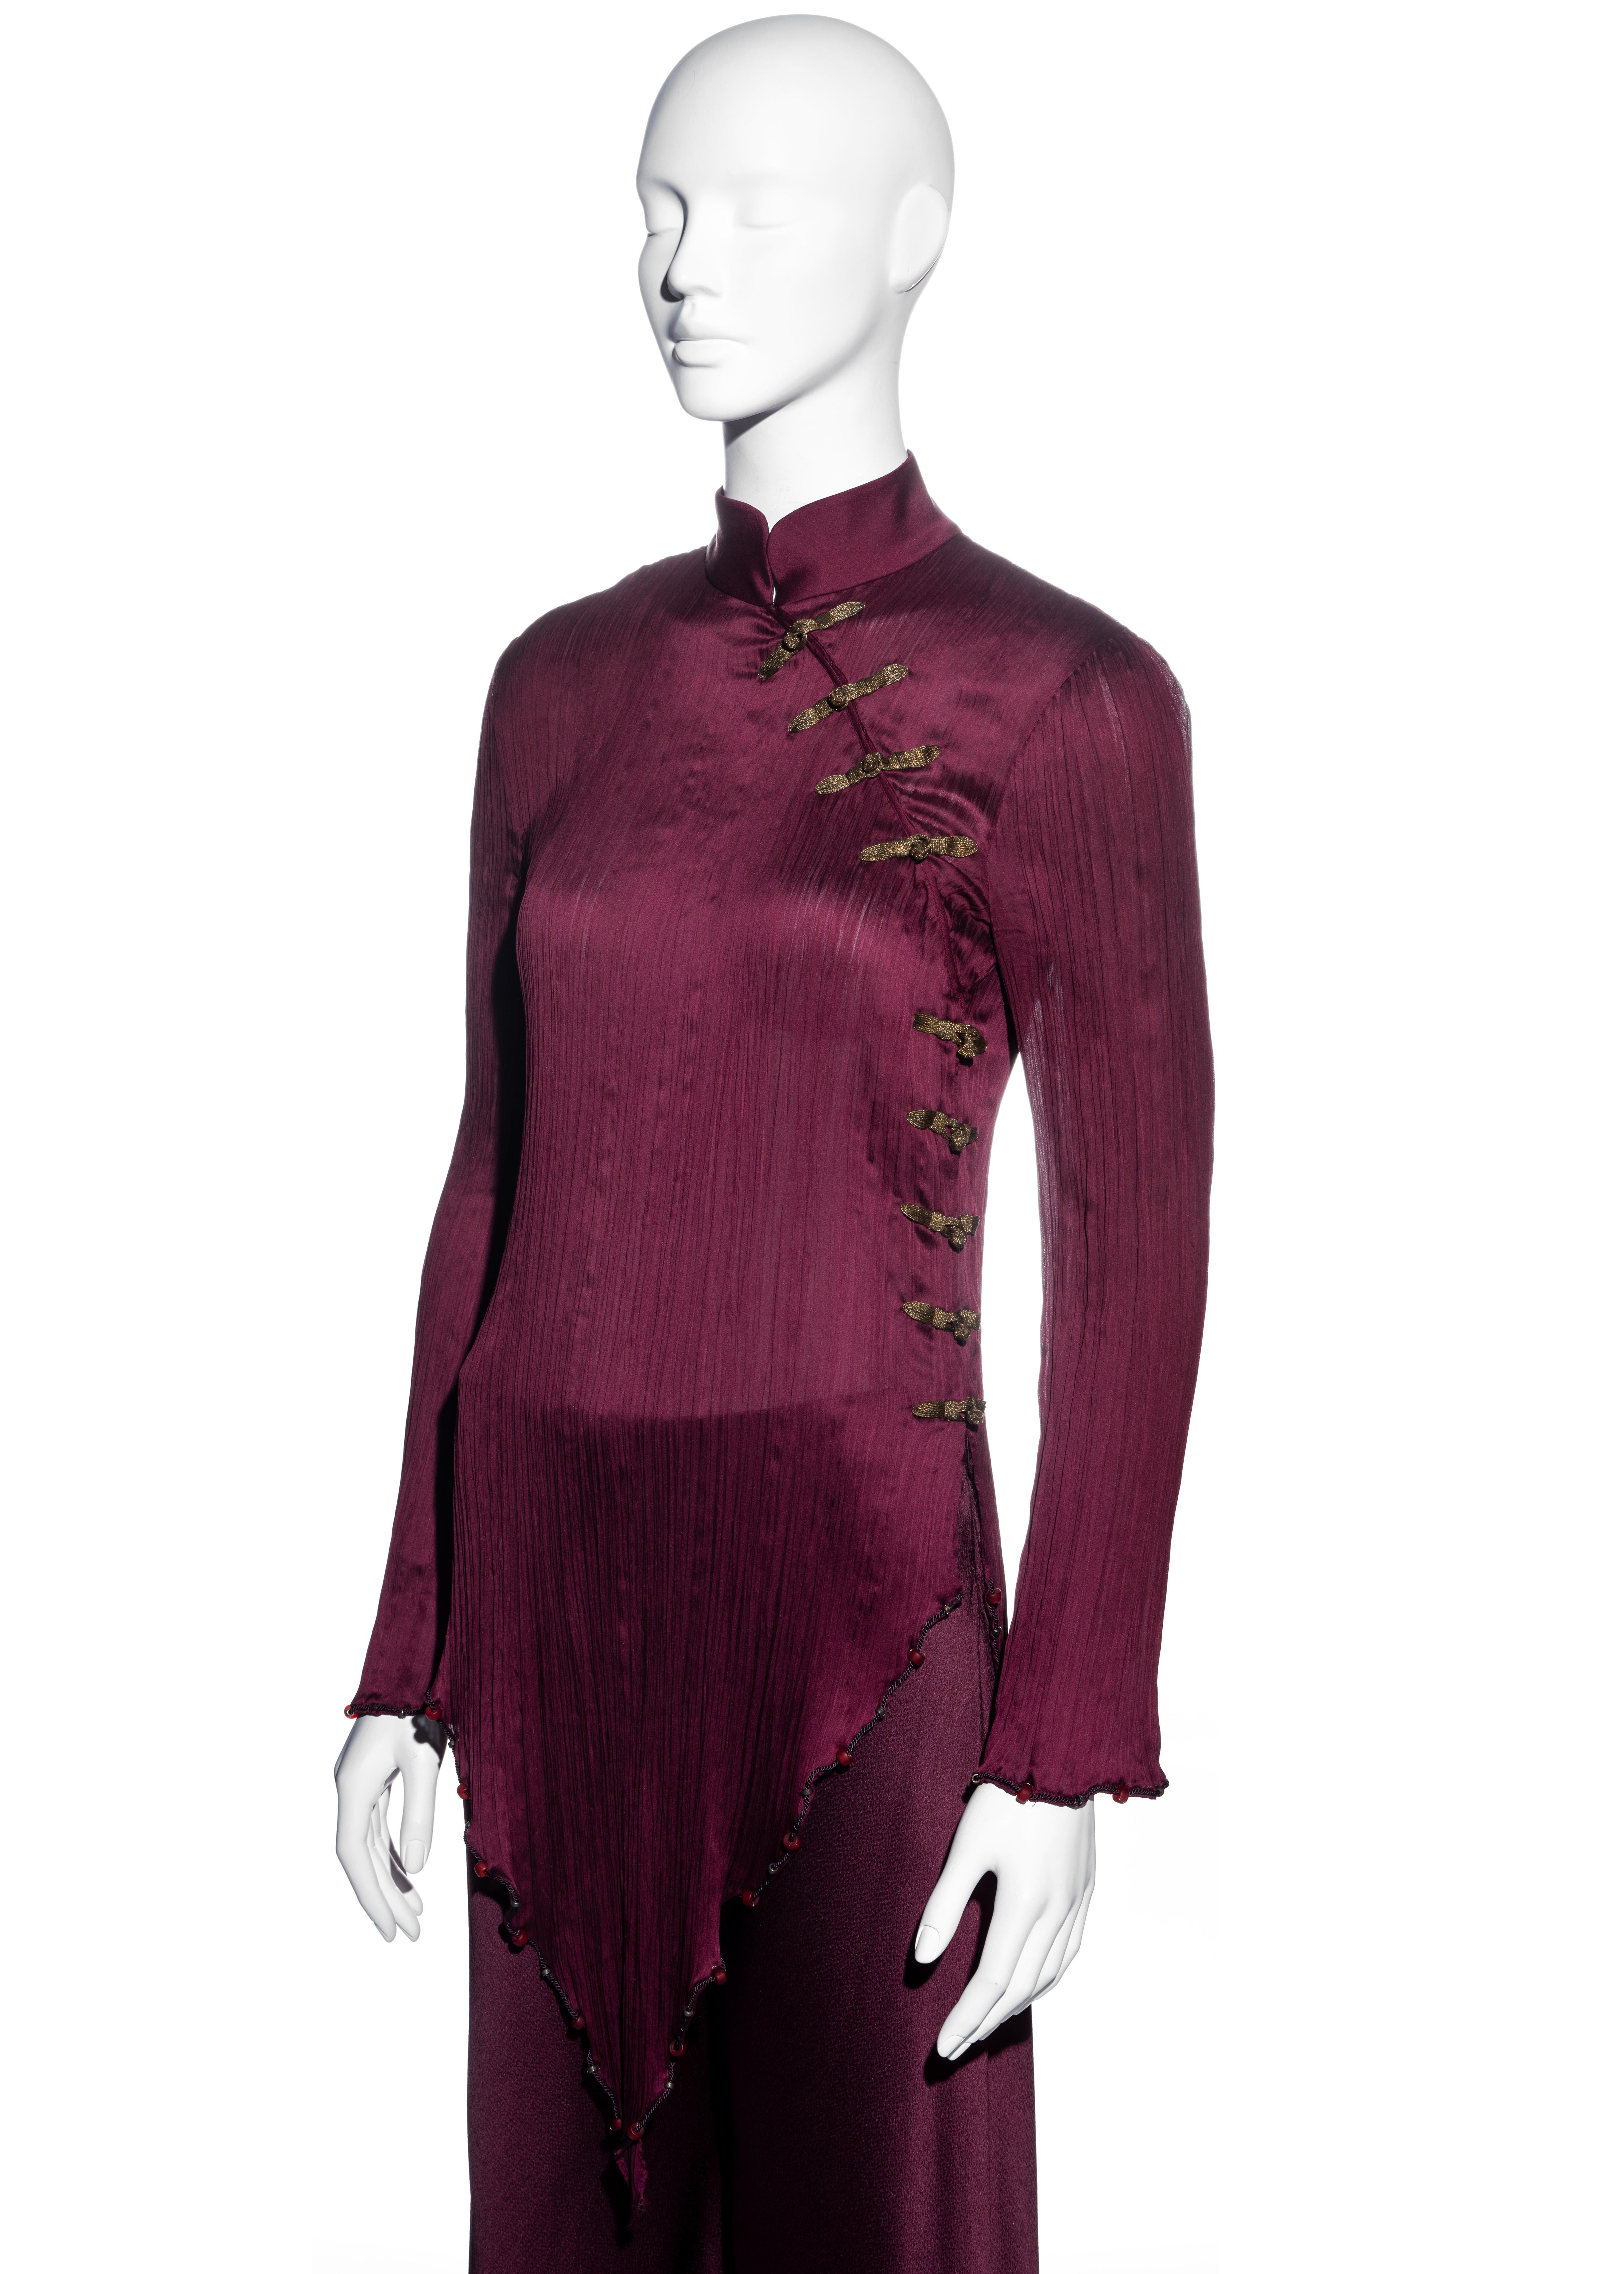 Women's Christian Dior by John Galliano Burgundy silk pleated pant suit, ss 1999